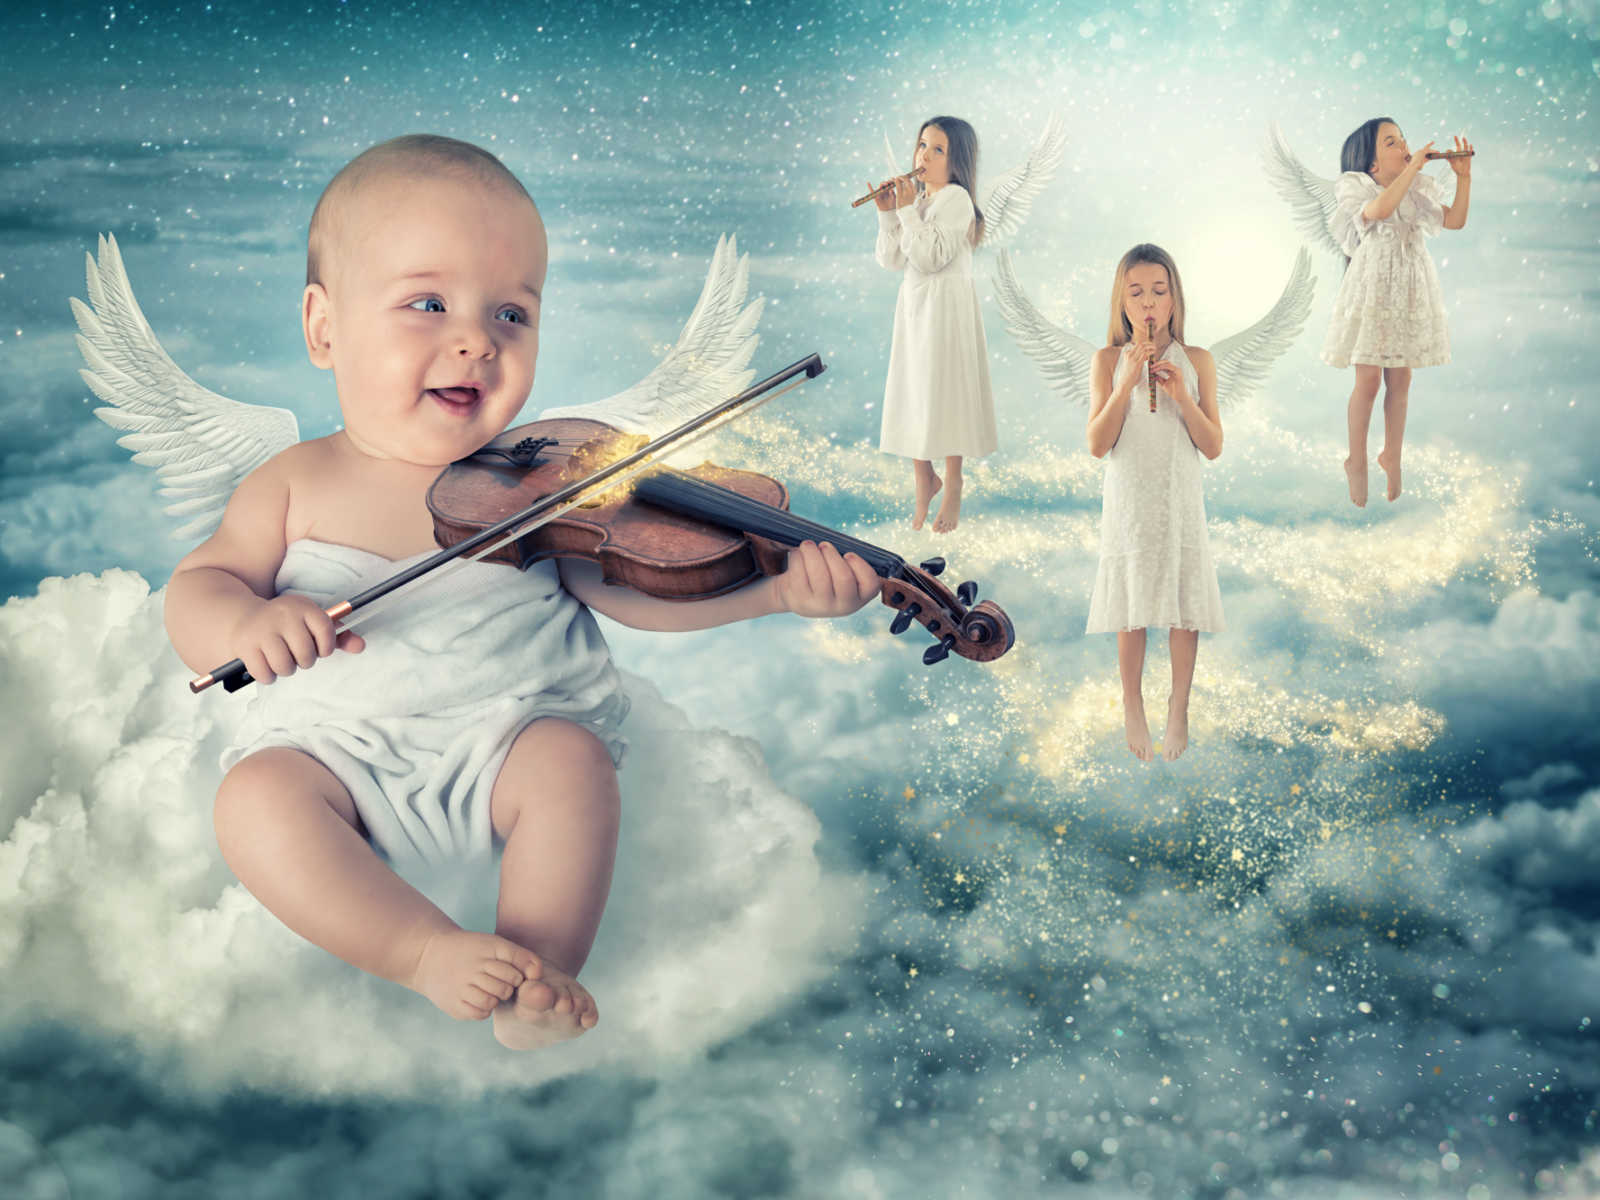 baby with wings playing the violin with three other girls floating with wings playing the flute to the baby's righr